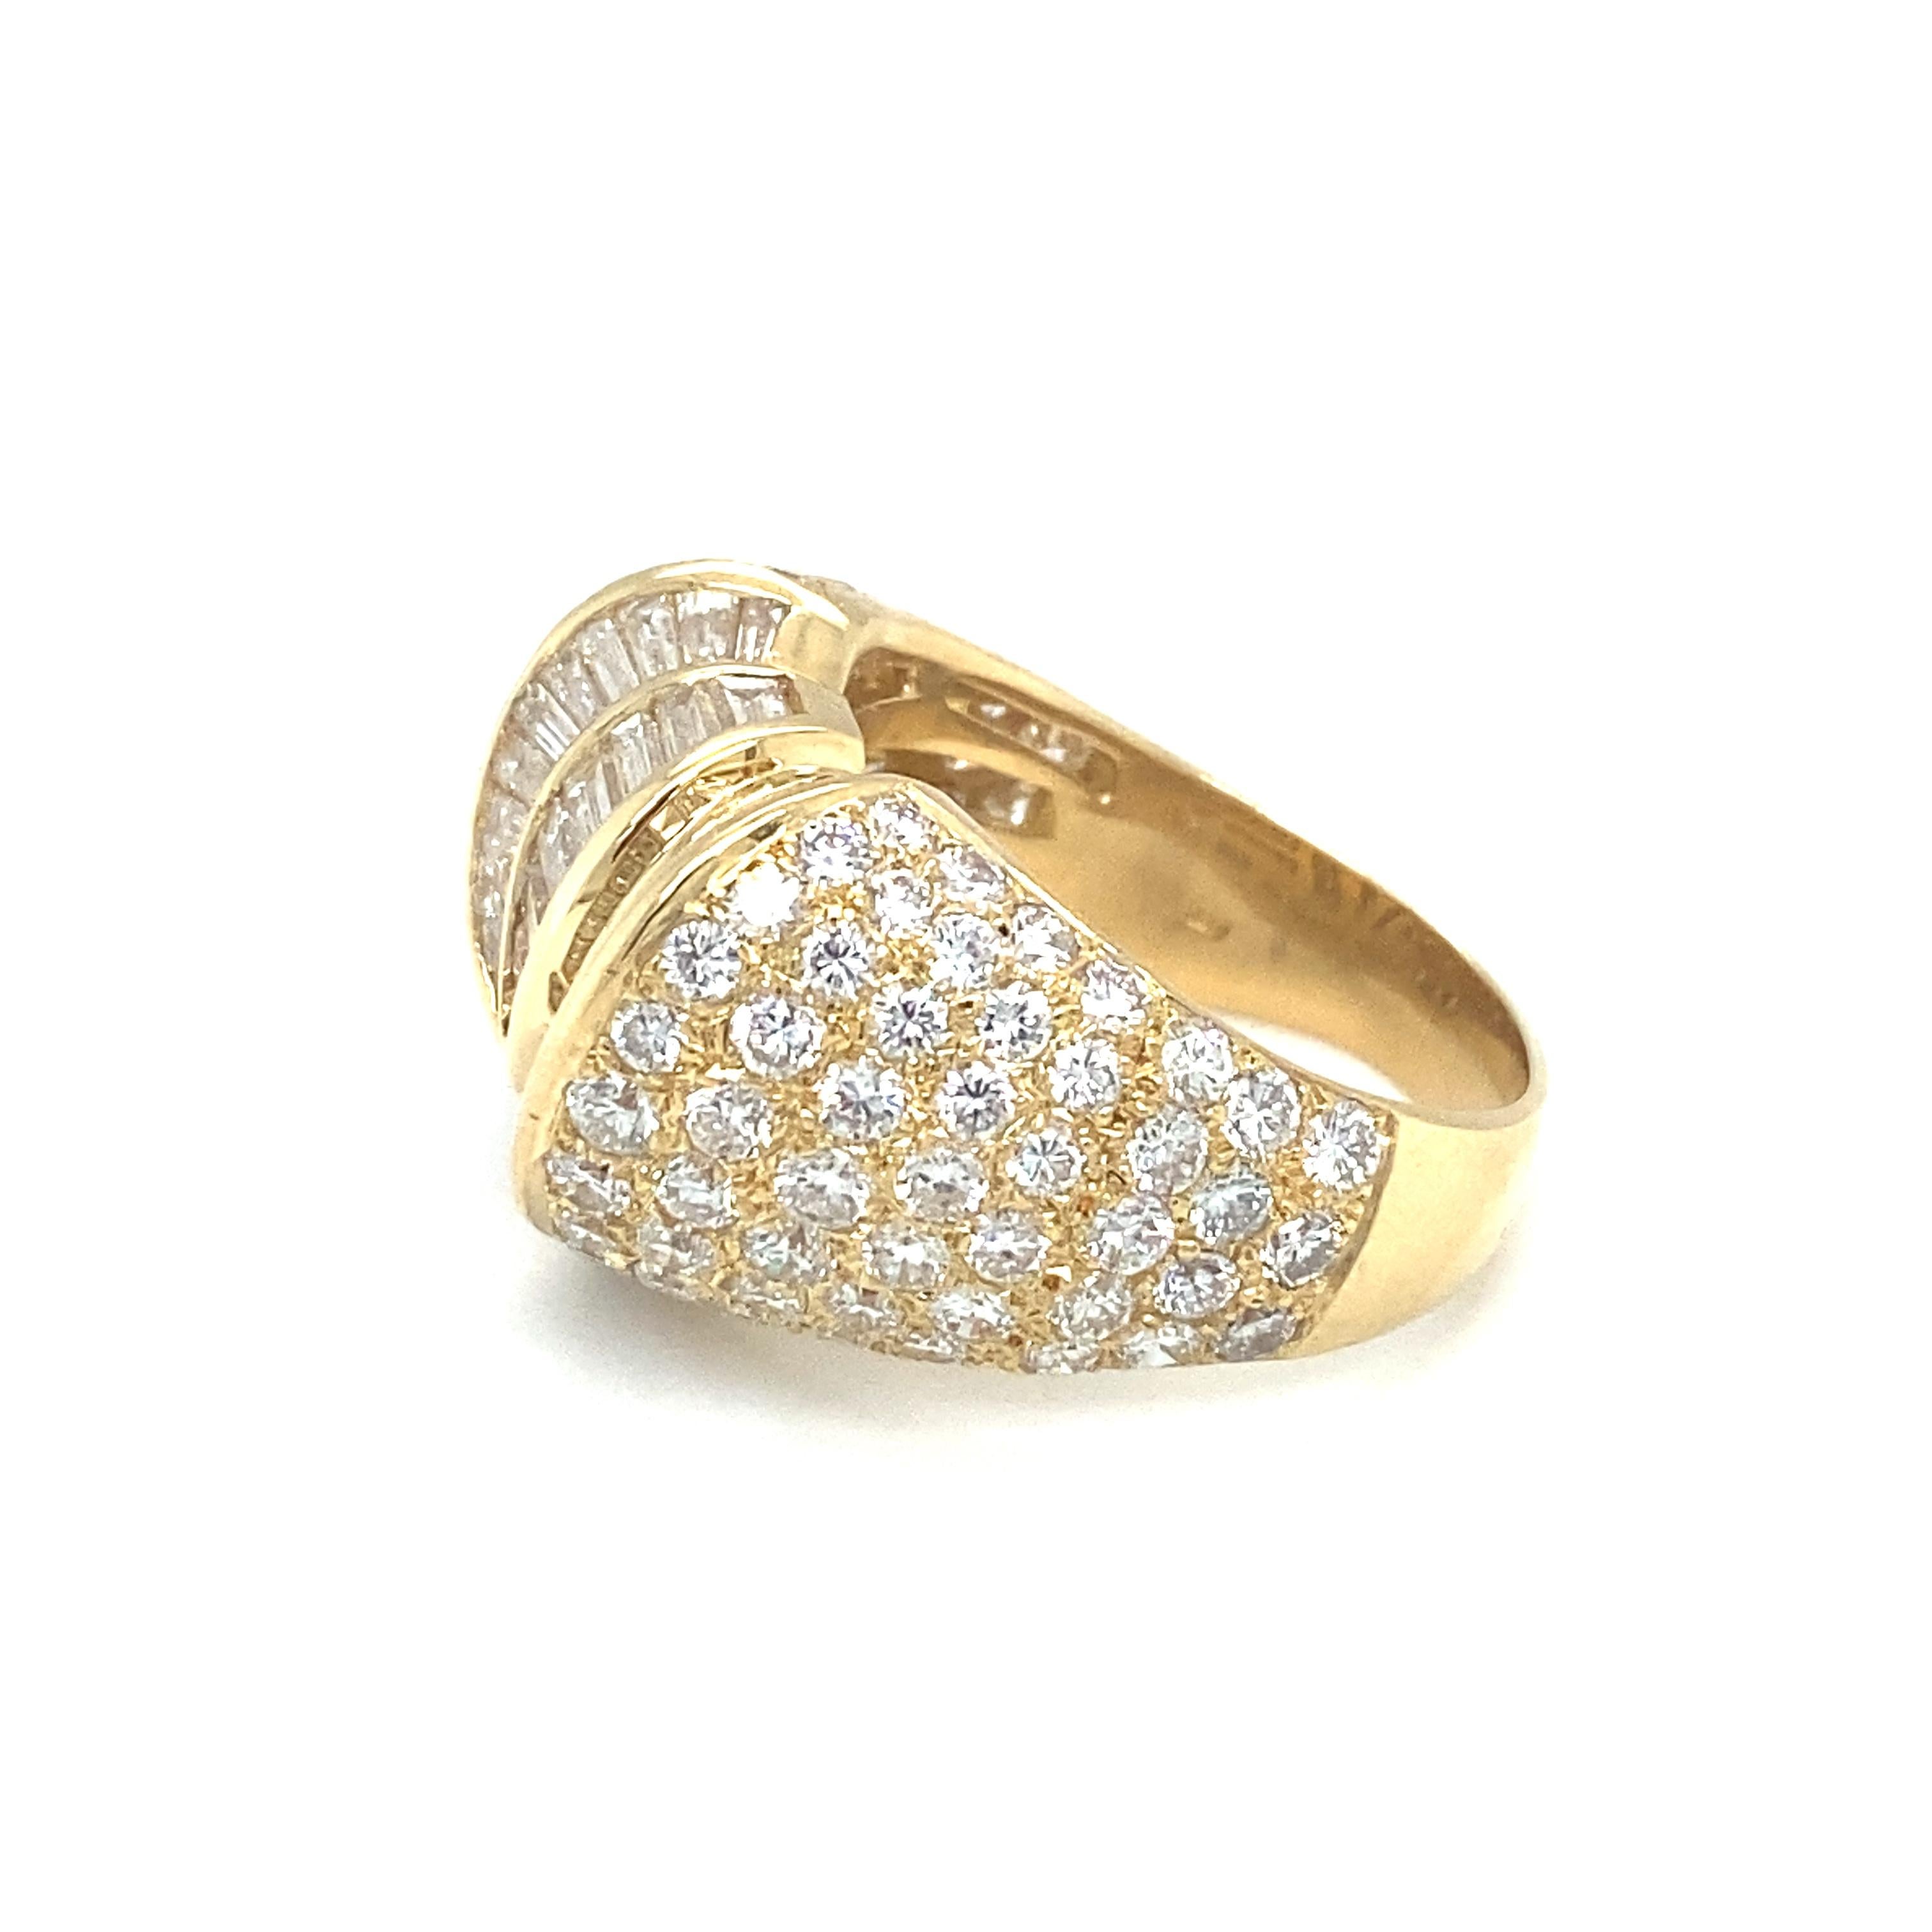 Baguette Cut Circa 1980s 7.0 Ctw Diamond Statement Ring in 18K Gold For Sale